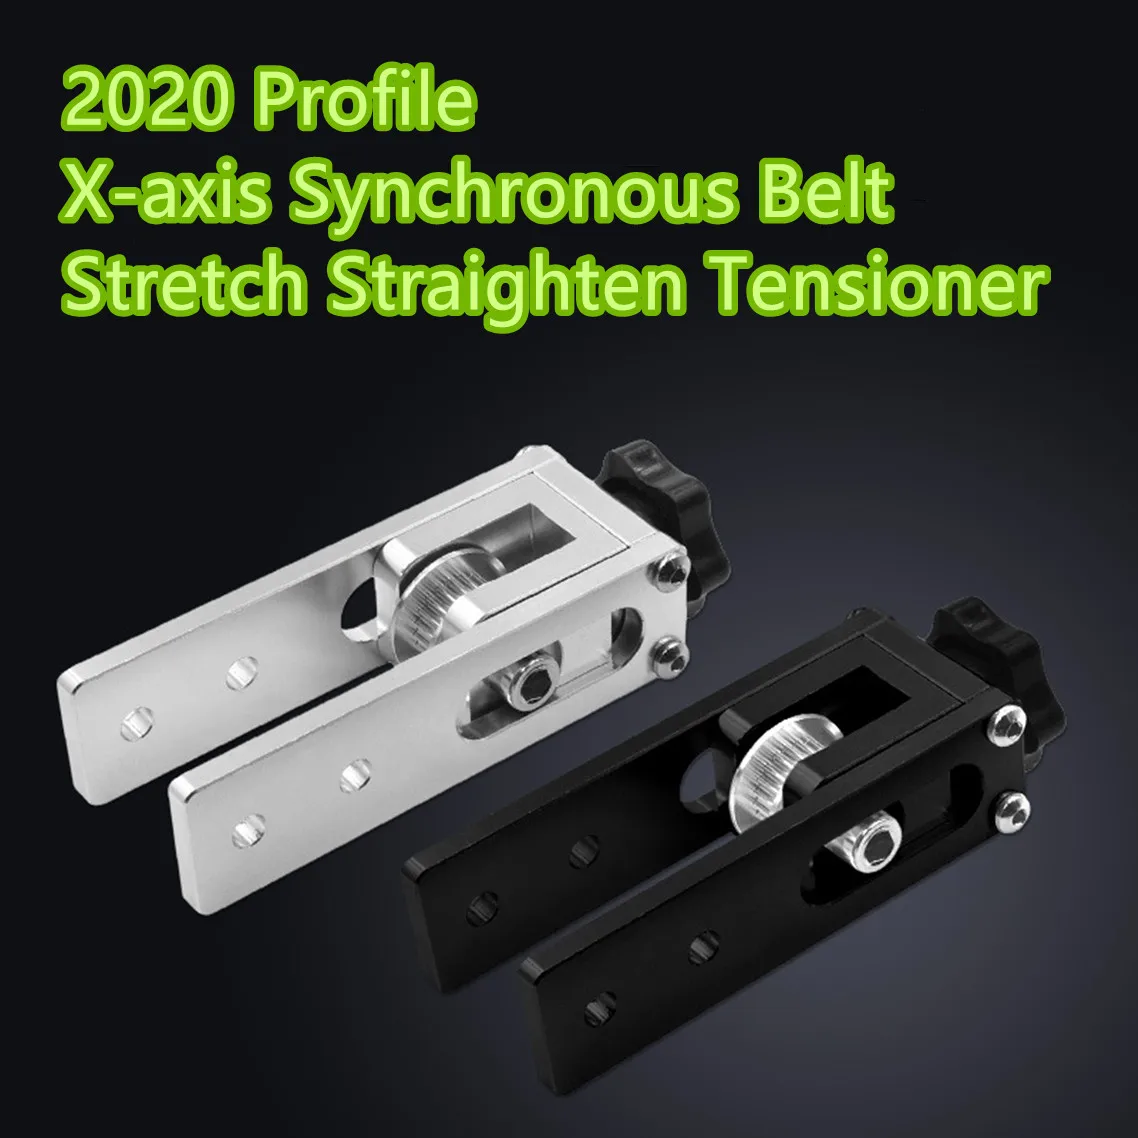 Tensioner 2020 Profile X-axis Synchronous Belt Stretch Straighten Tensioner For Ender 3 Creality CR-10 CR-10S 3D Printer Parts.